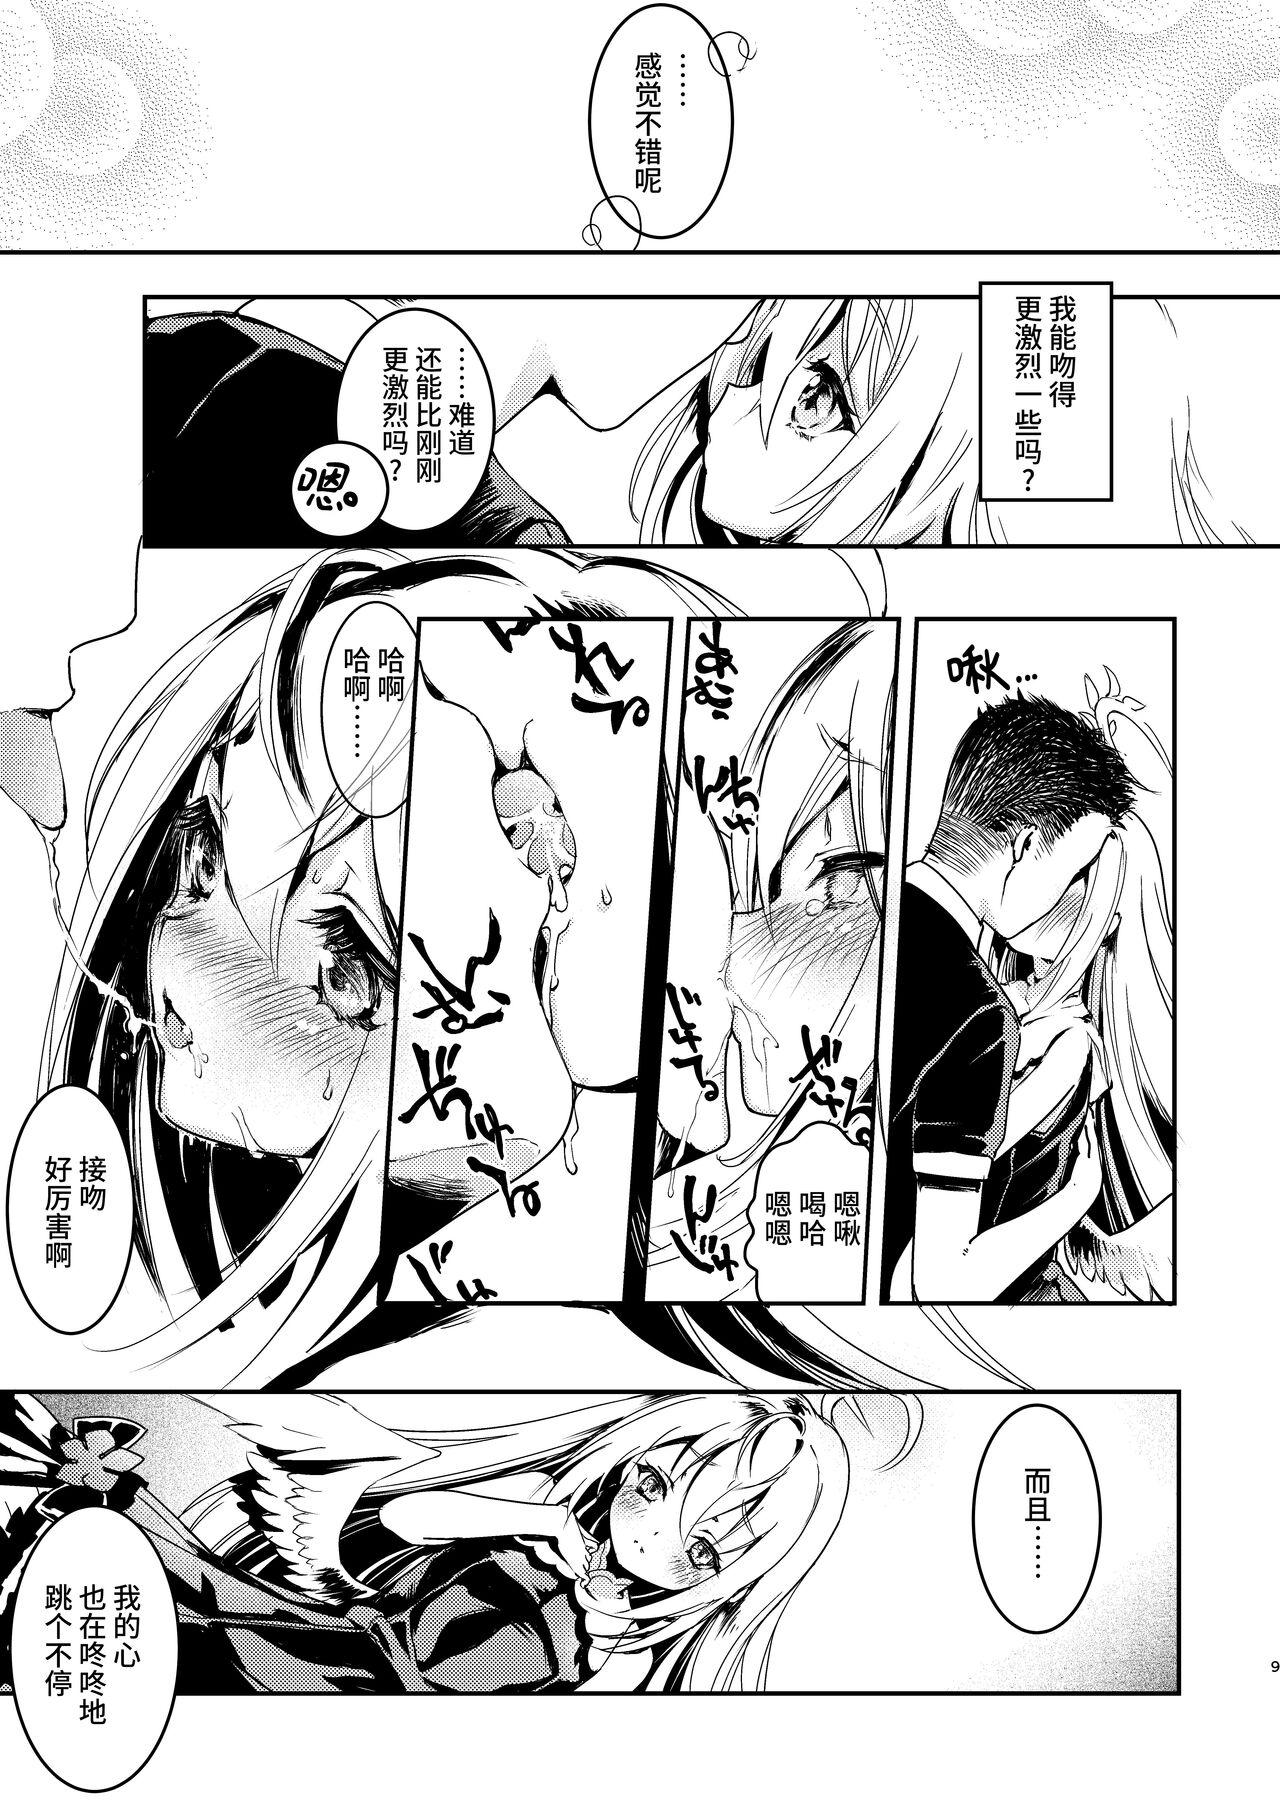 Stroking Sensei, Oshiete Hoshii. - Teacher, I would like you to tell me. | 老师、请您教教我。 - Blue archive Publico - Page 11